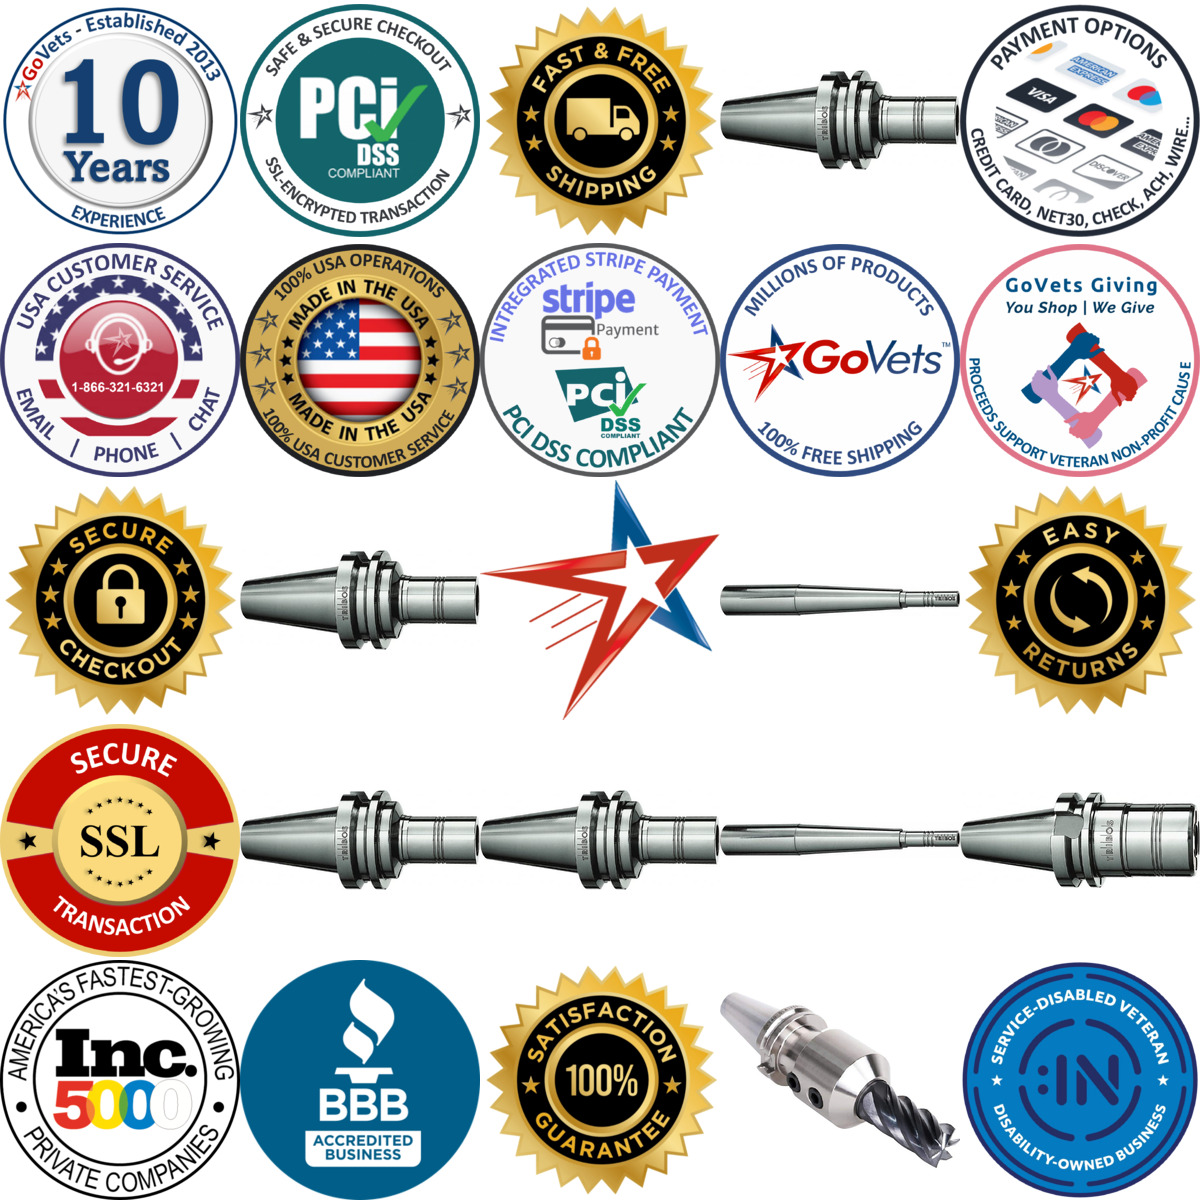 A selection of Lathe Chuck Jaws products on GoVets